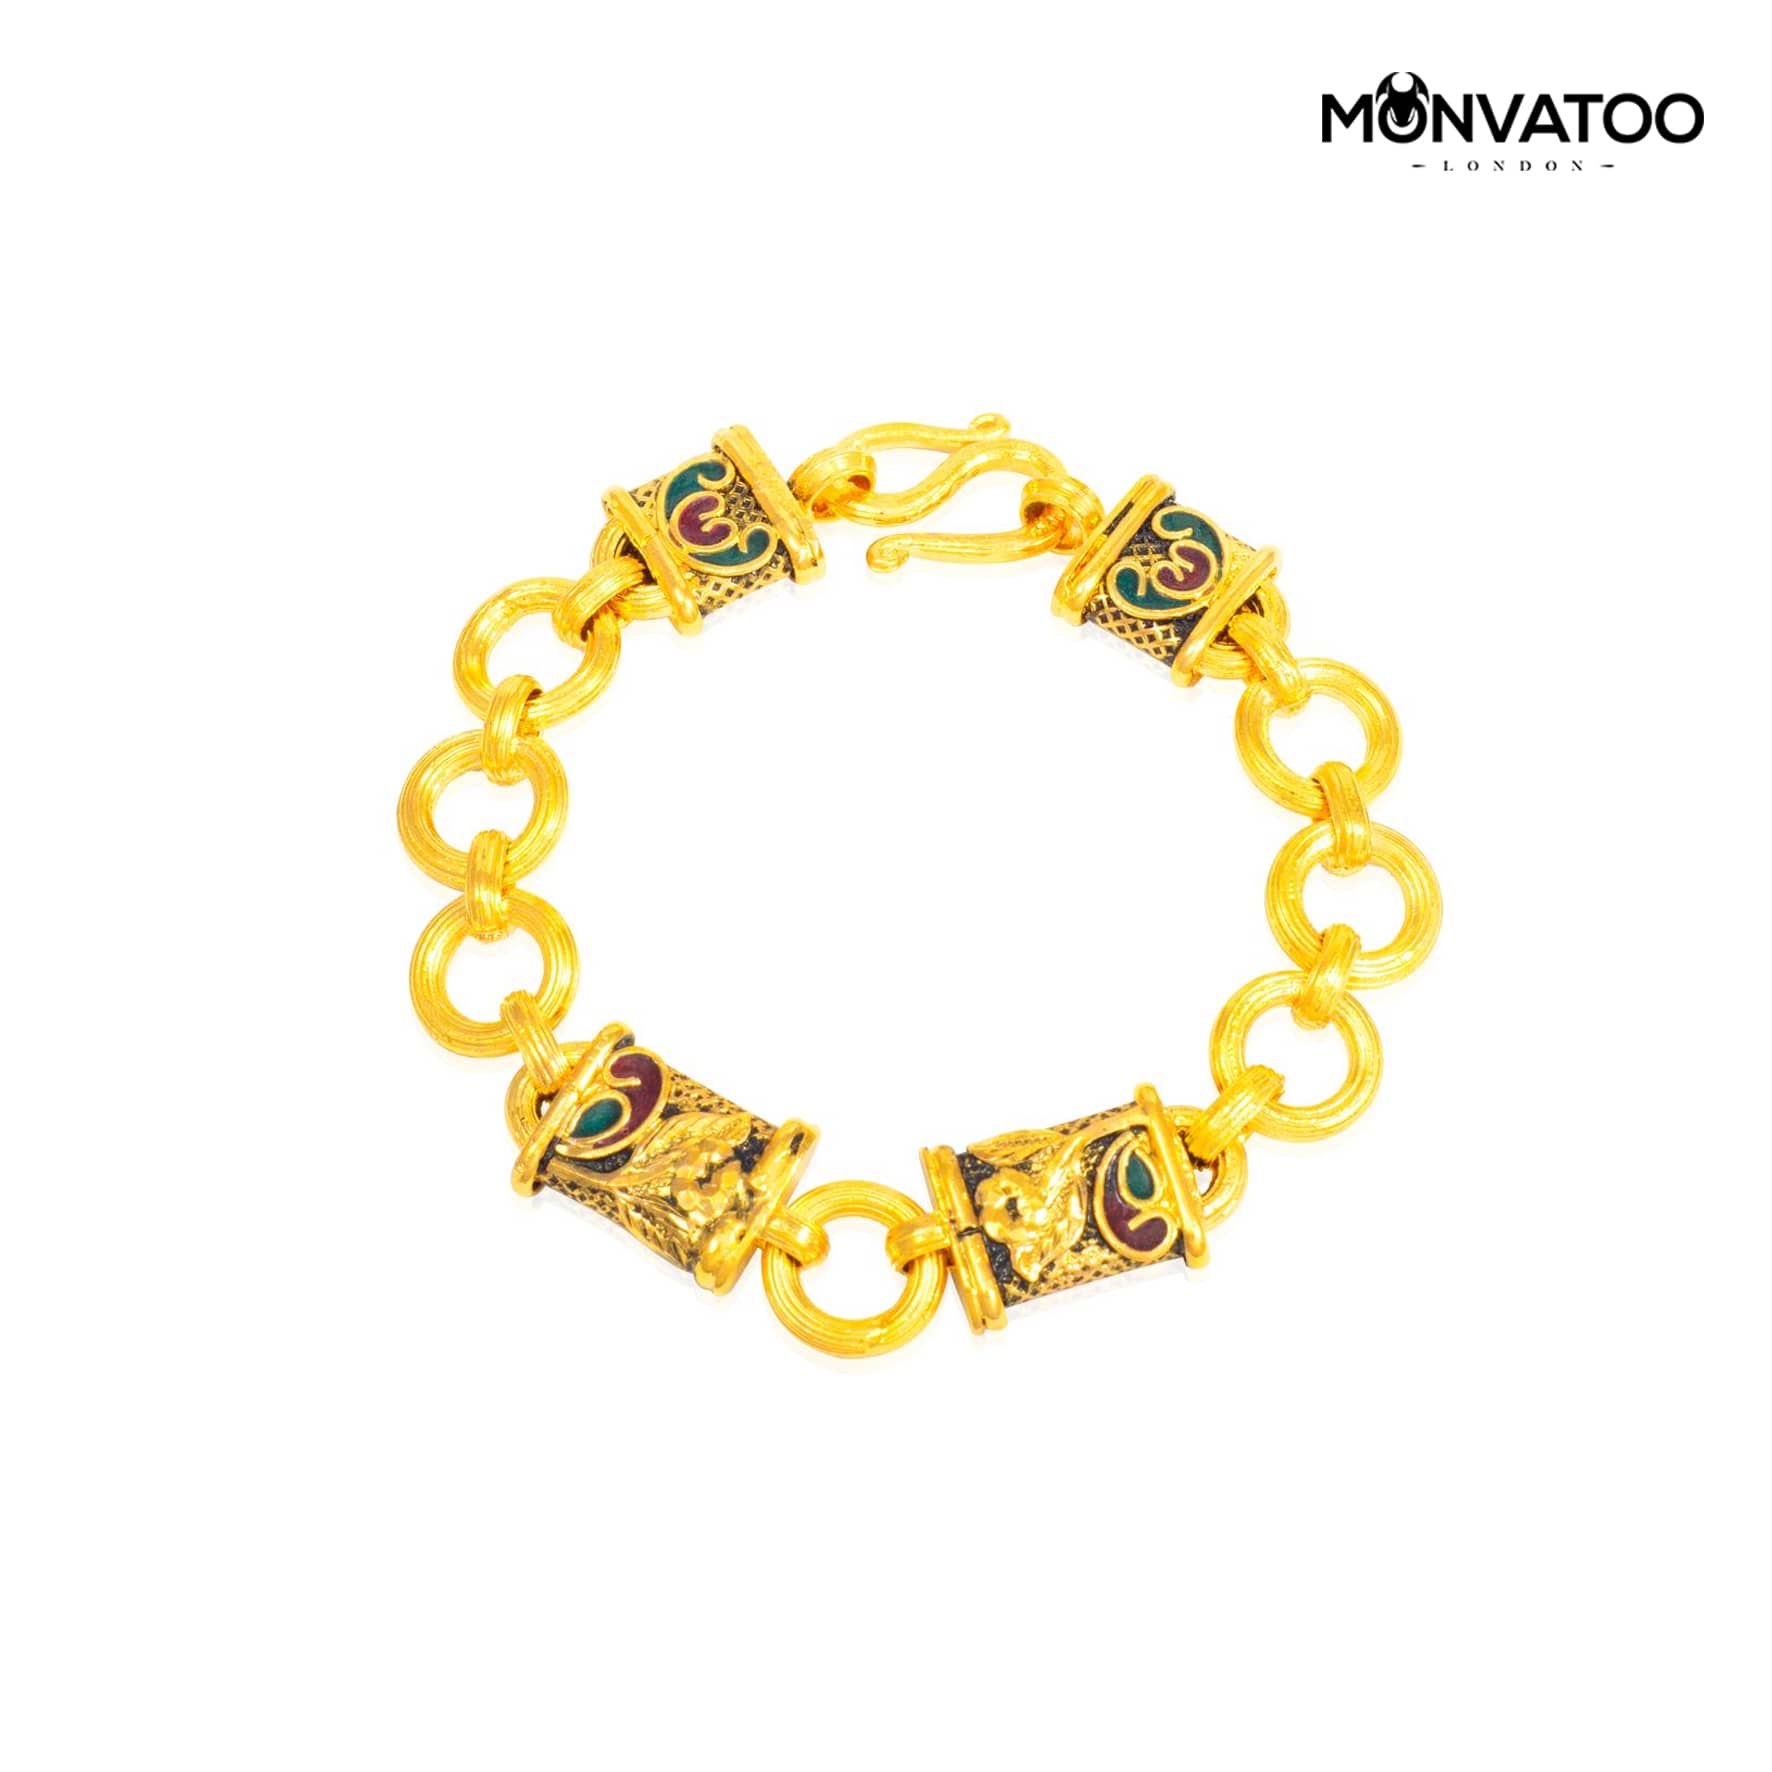 Golden Forget-Me-Not Padlock Chain Bracelet by MONVATOO London